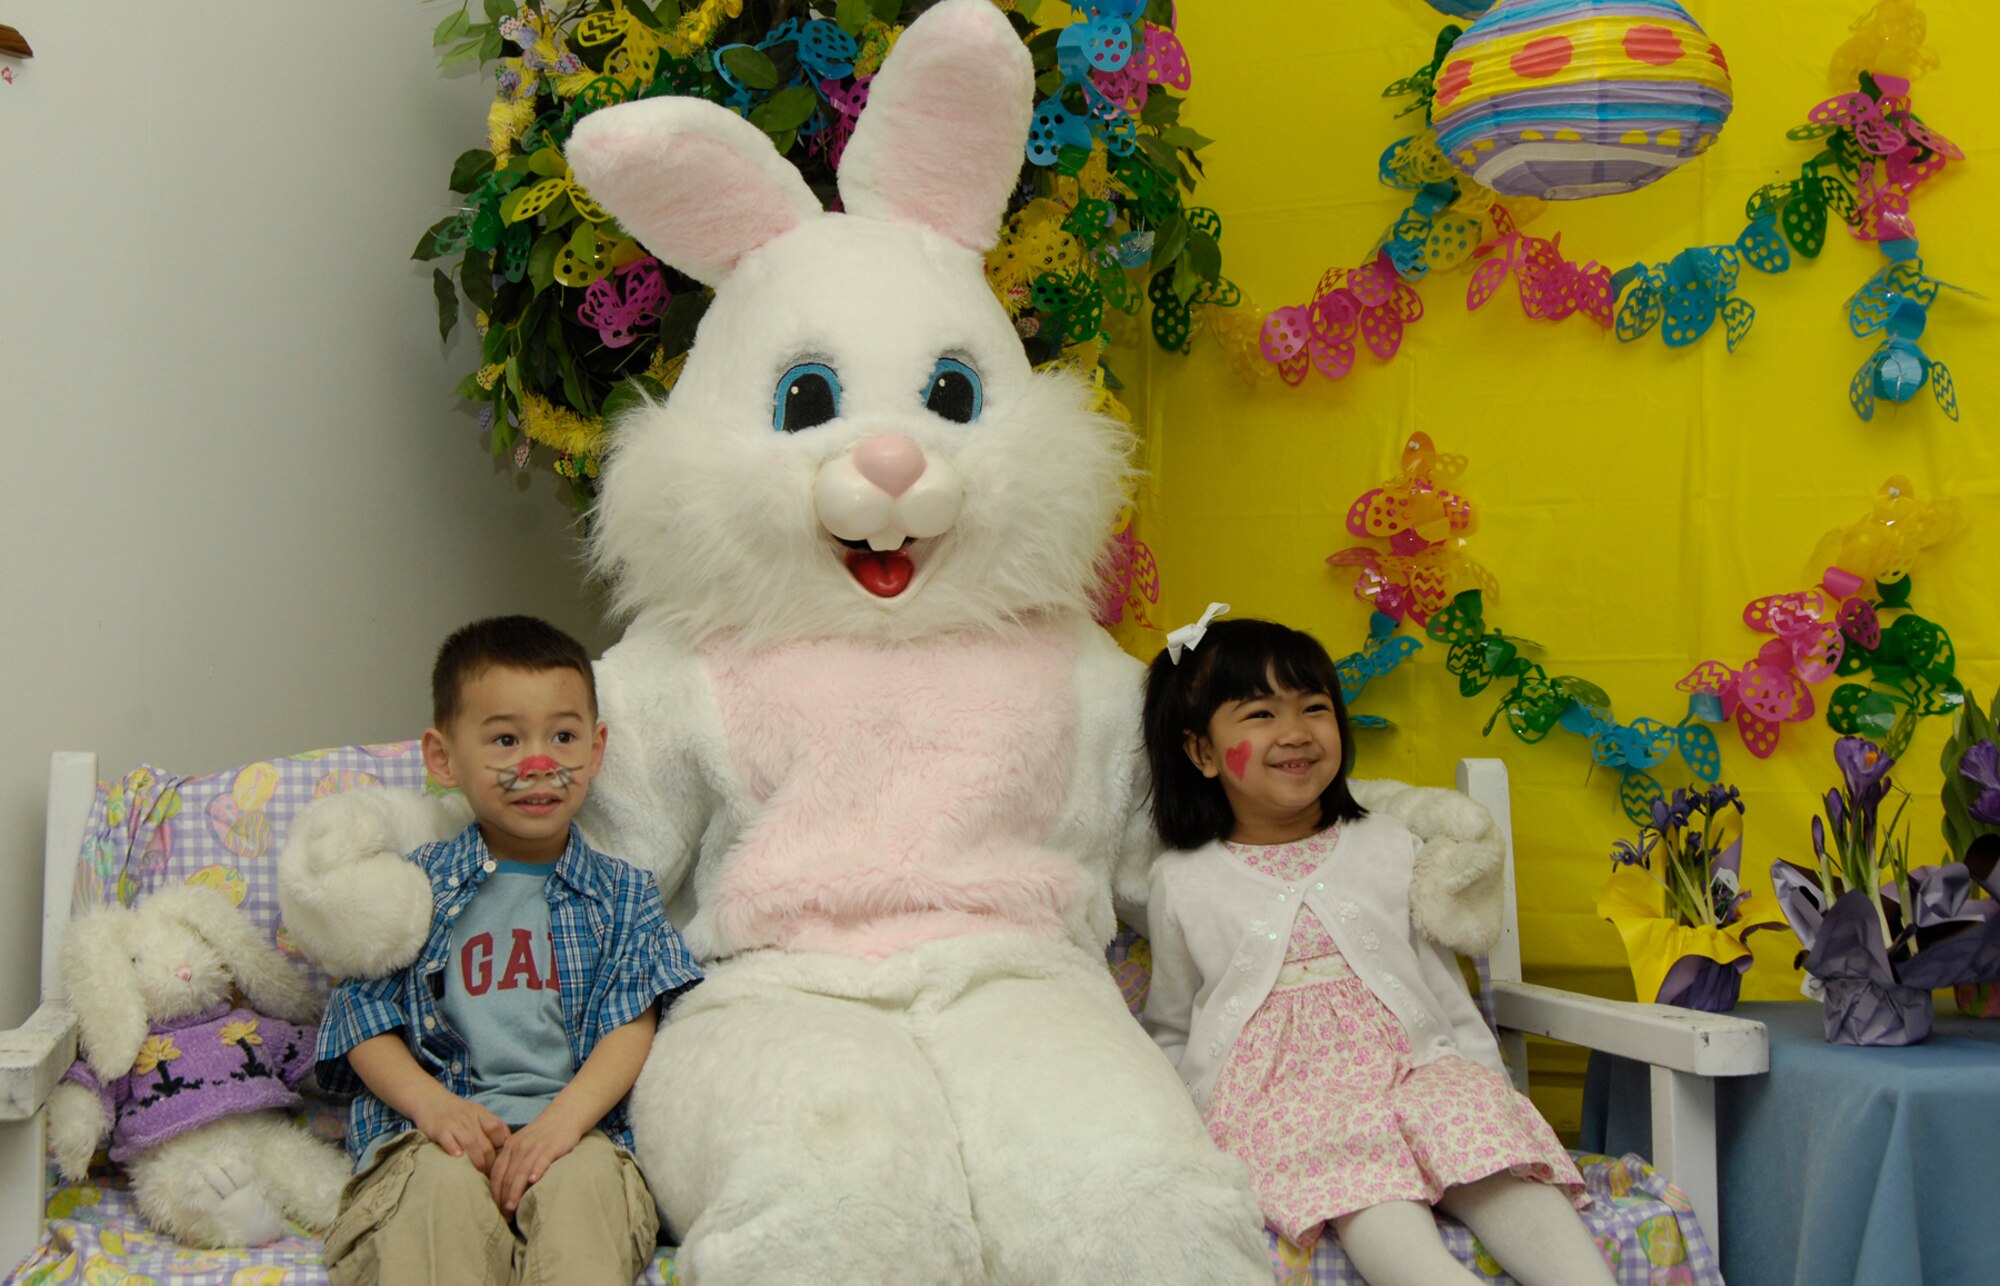 HANSCOM AIR FORCE BASE, Mass. –Max and Mia Woolums have their picture taken with the Easter Bunny at the Spring Fling event on March 28 at the Base Chapel.  The event was sponsored by the Hanscom Spouses Club and Base Chapel and included a number of activities such as crafts, games, face painting and a visit from the Easter Bunny. (U.S. Air Force photo by Linda LaBonte Britt) 